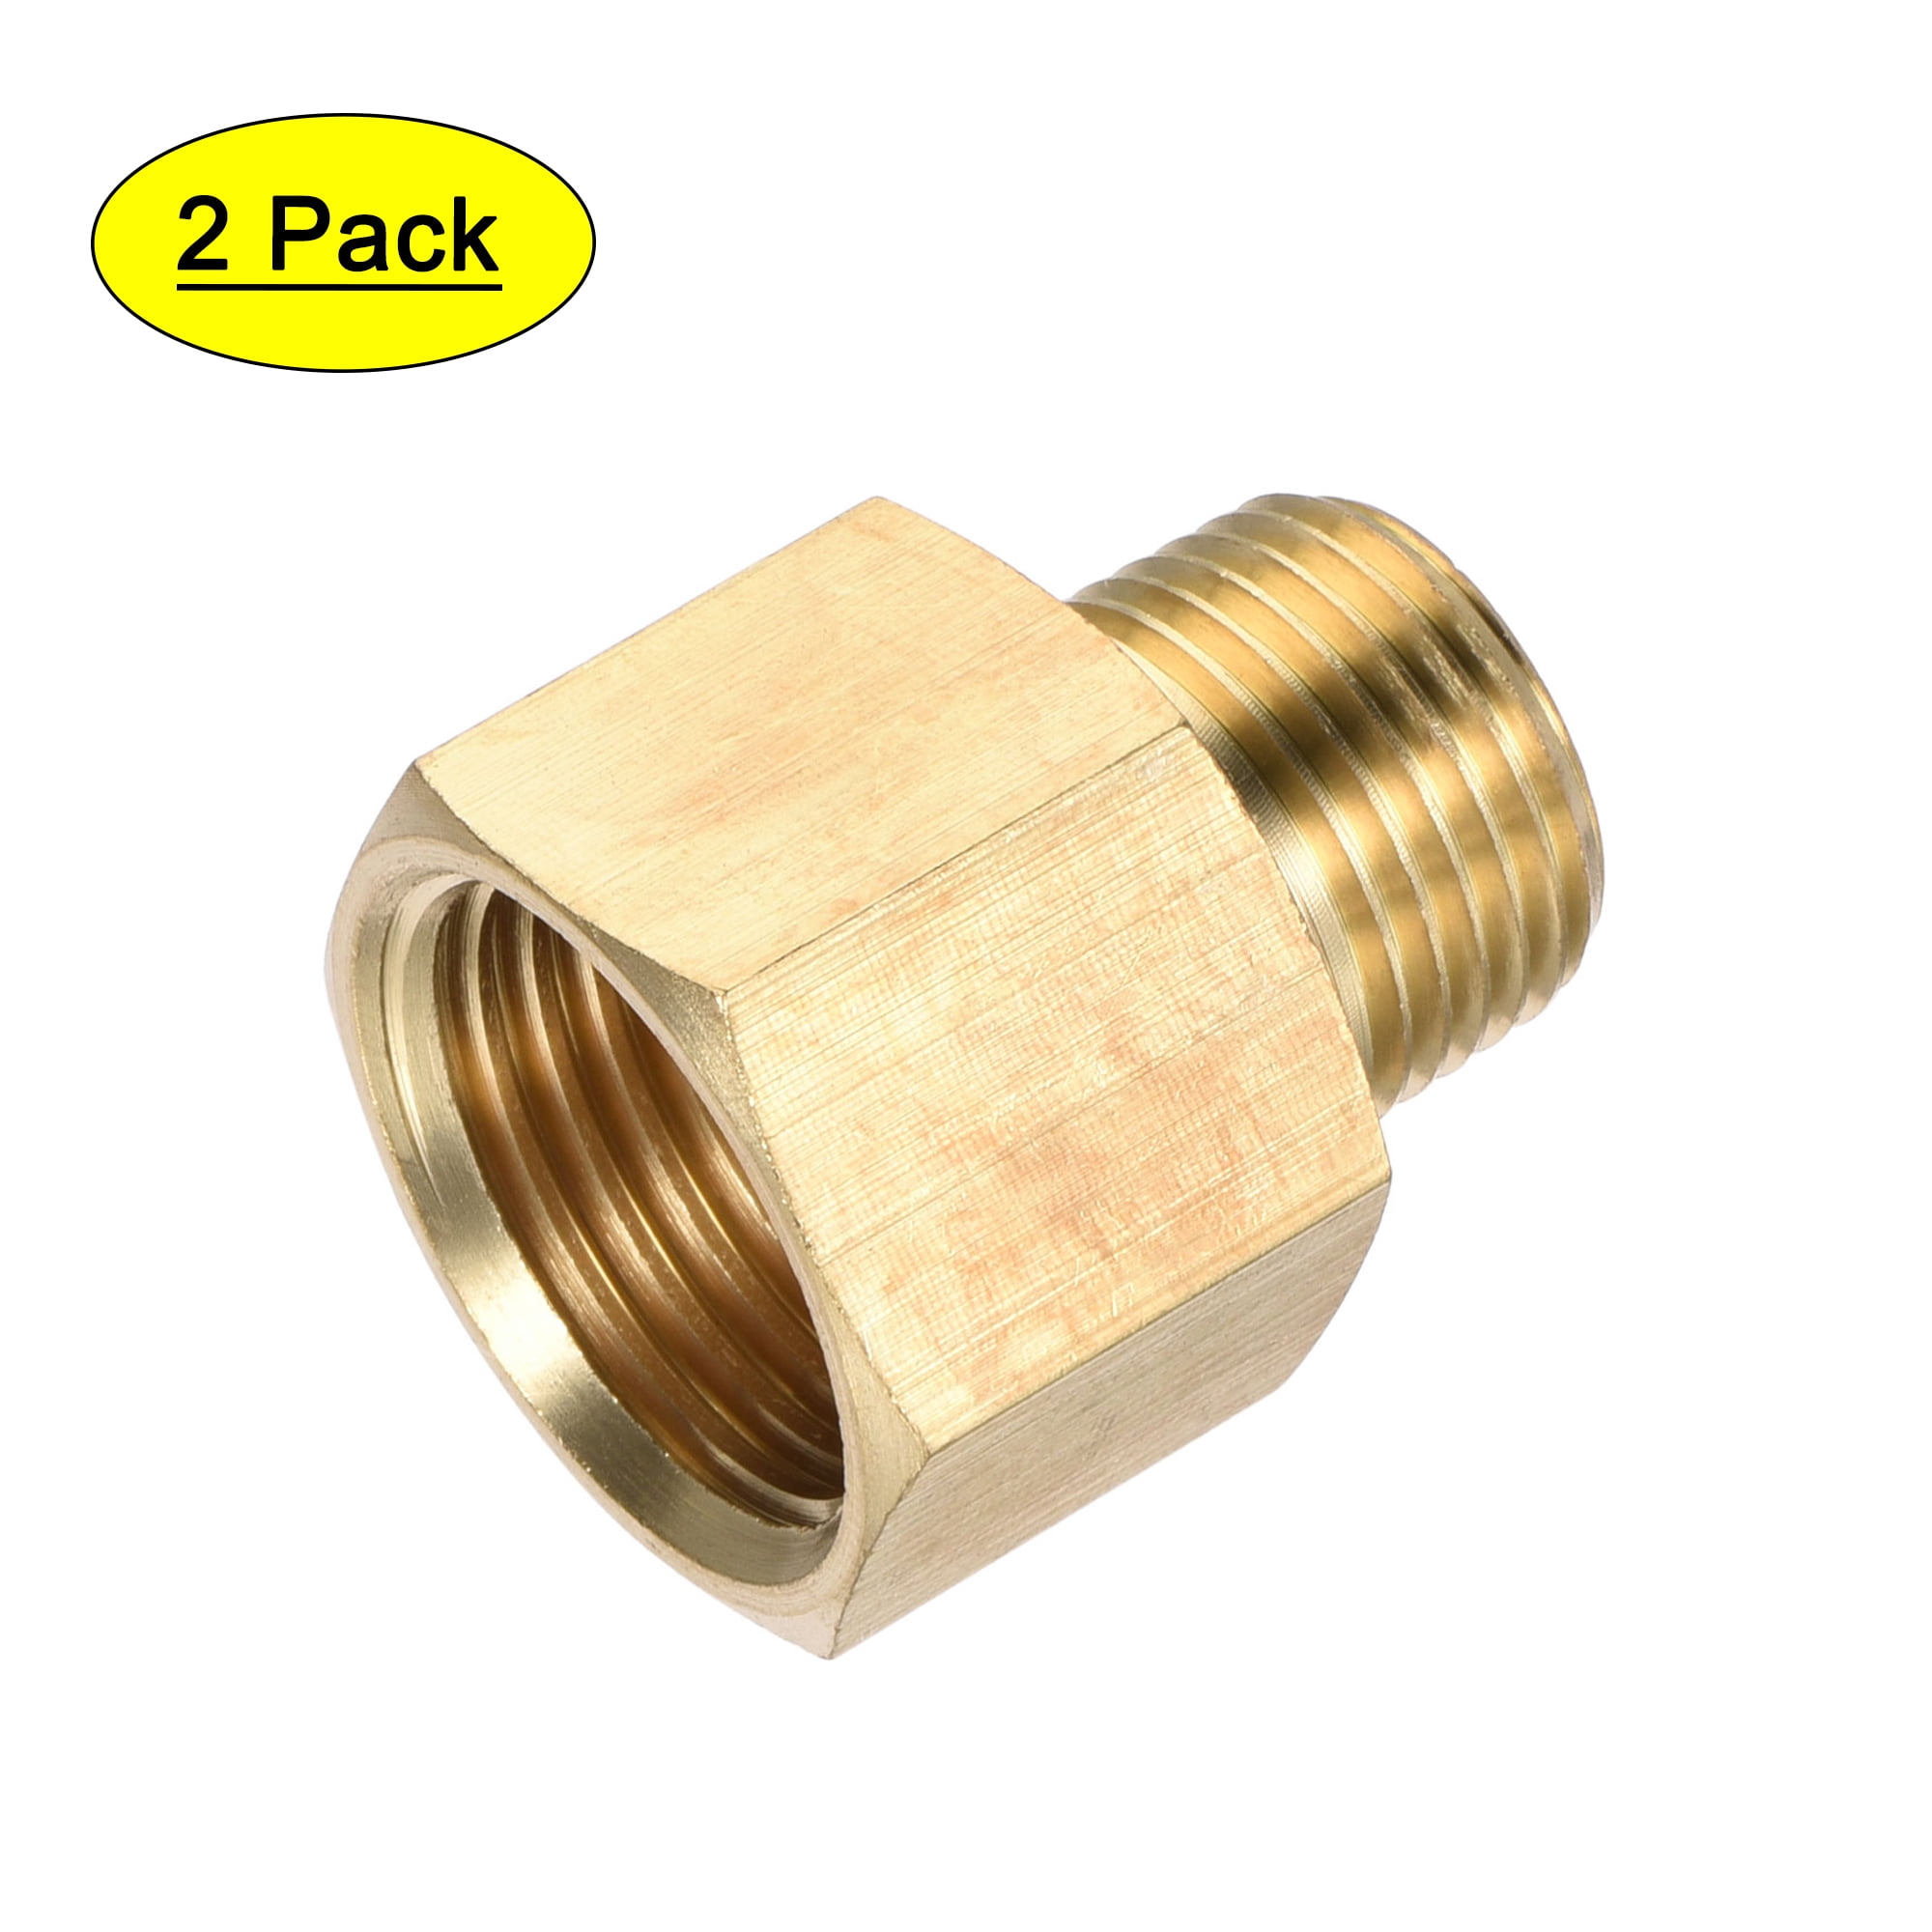 10BA Brass Nuts pack of 25 